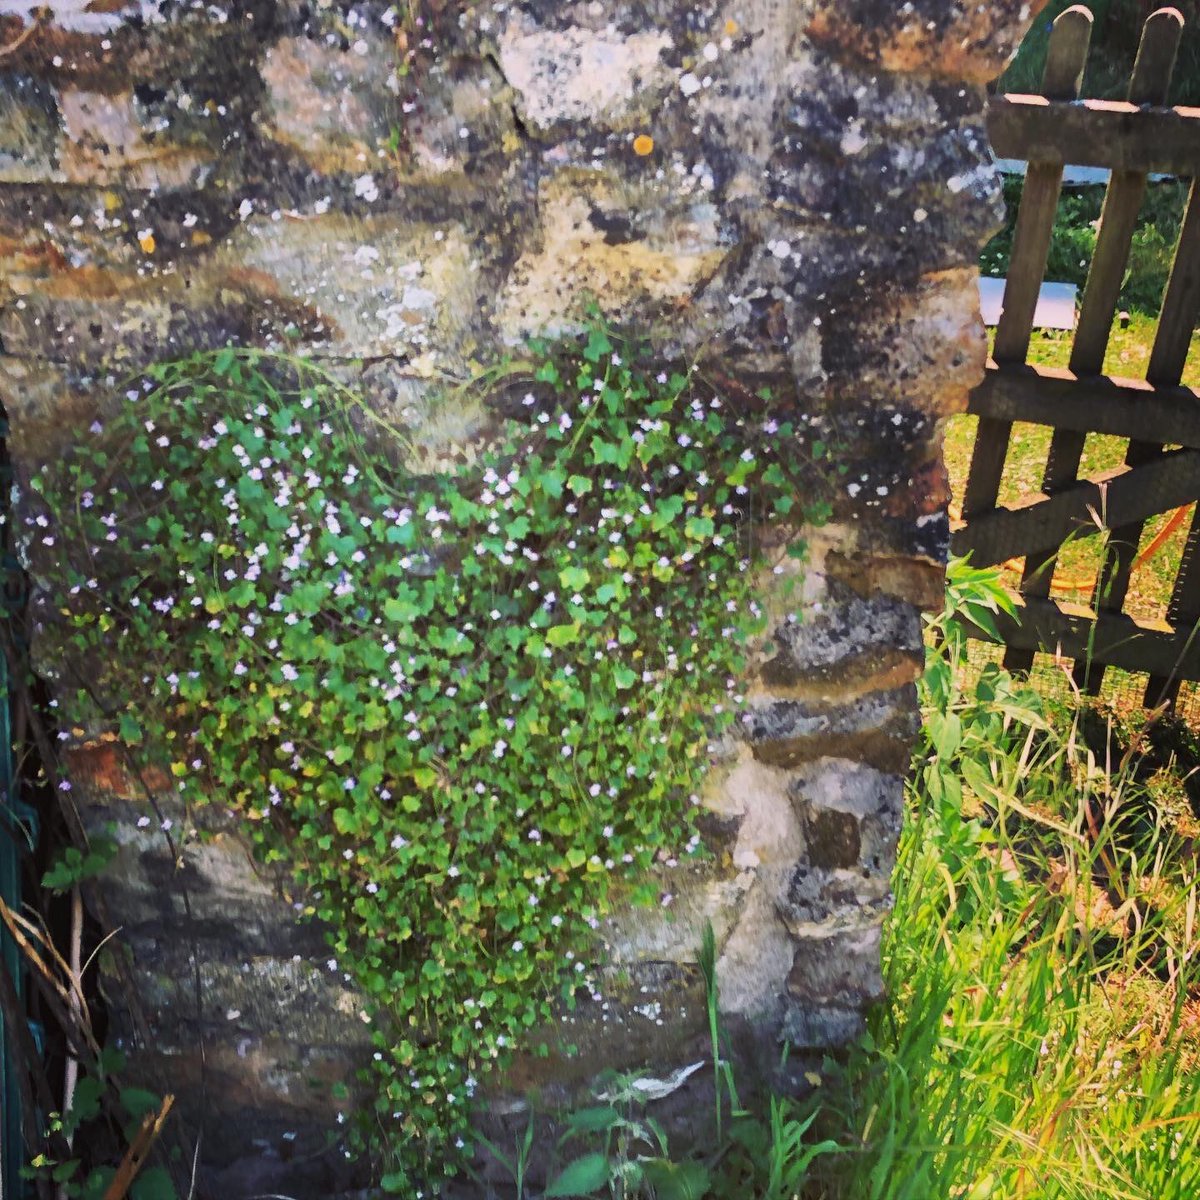 I was pretty sure I would  find  love within the walls of the #kitchengarden 💓#springtime #lifeinengland #gardening #walledkitchengarden #somerset #lockdow #stayathome #WorkFromHome